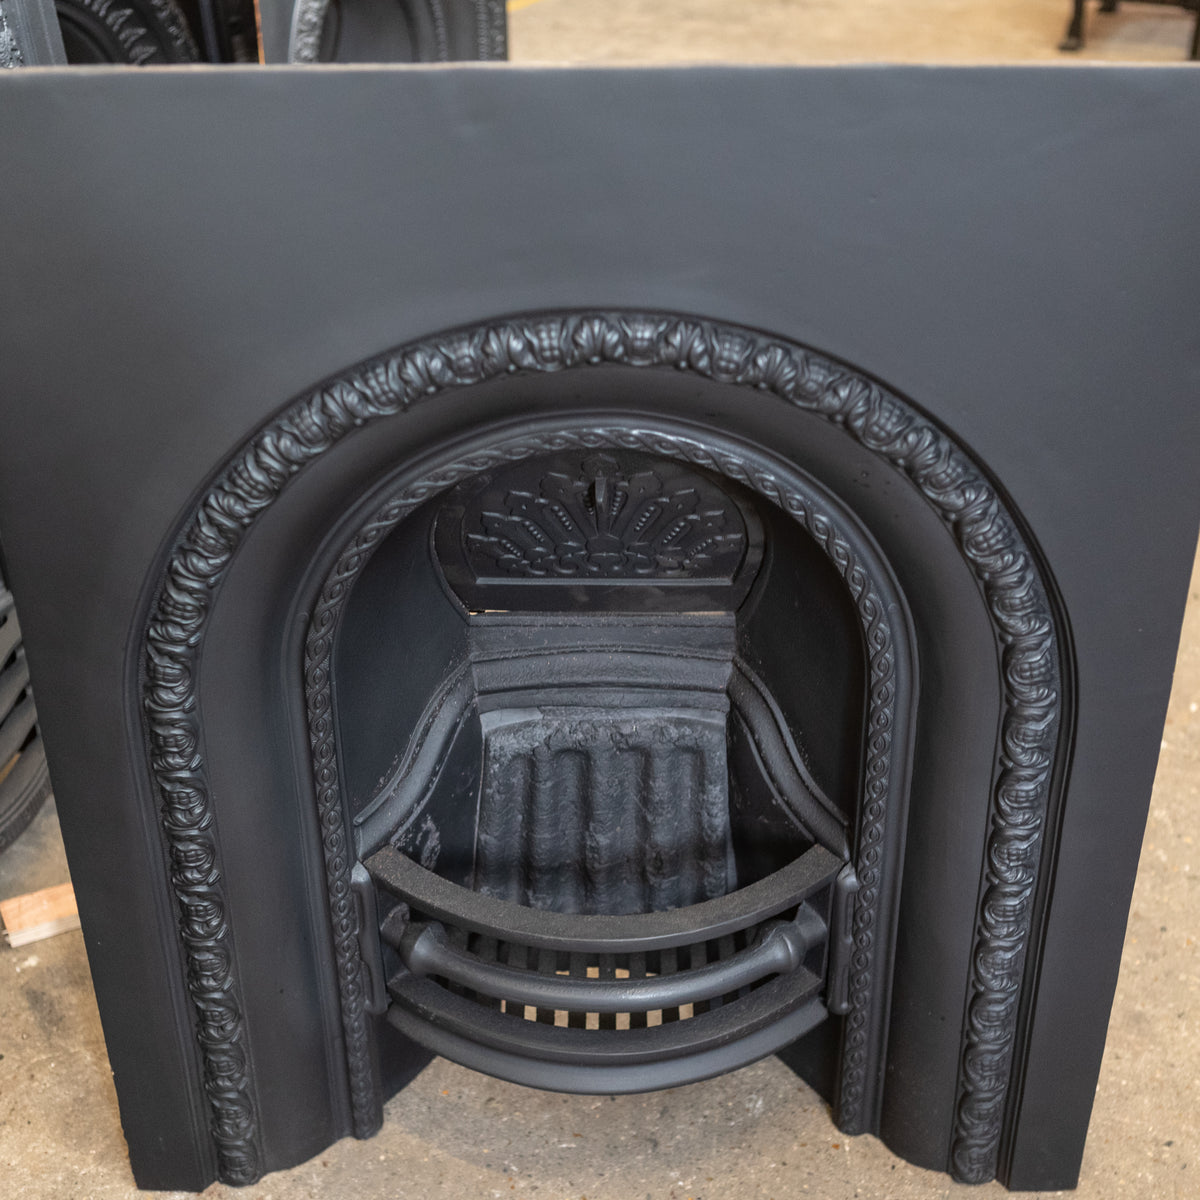 Antique Victorian Cast Iron Fireplace Insert | The Architectural Forum